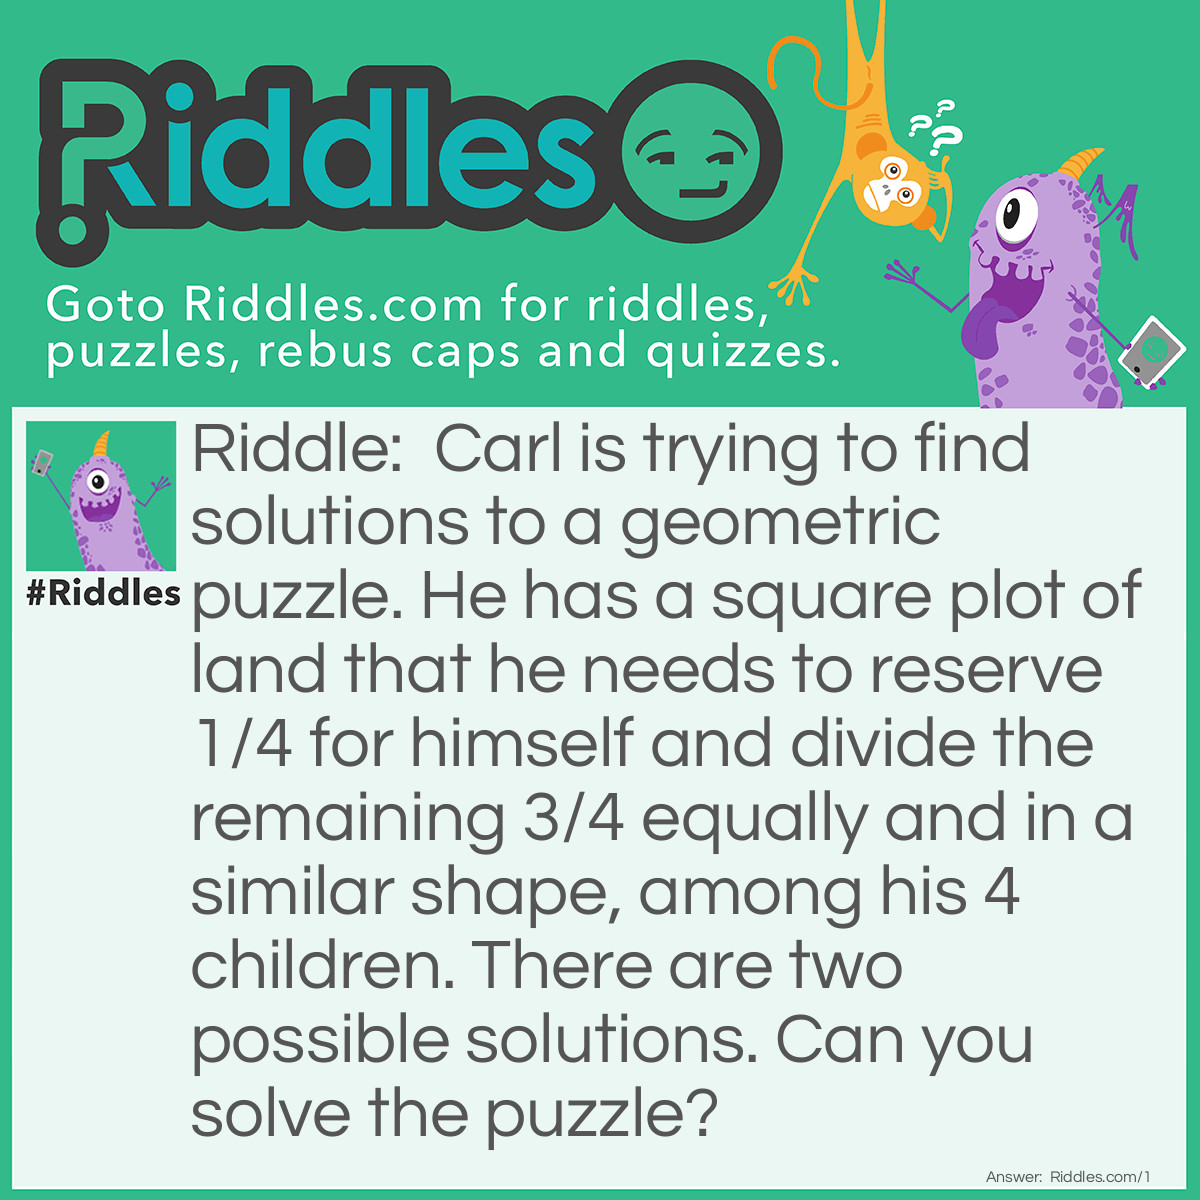 Riddle: Carl is trying to find solutions to a geometric puzzle. He has a square plot of land that he needs to reserve 1/4 for himself and divide the remaining 3/4 equally and in similar shape, among his 4 children. There are two possible solutions. Can you solve the puzzle? Answer: <strong>Solution #1 - Squares</strong>
First, Carl divides his as to reserve to himself one-fourth in the form of a square.
<img src="../../../uploads/images/Geometric-Puzzle-1.jpg" alt="Geometric Puzzle #1" width="600" height="600" />
Then, Carl takes the remaining 3/4 shape and scales it down by 1/4.  He then, multiplies the shape into 4 identically shaped pieces, and aranges them so that they fit into the original 3/4 shape.
<img src="../../../uploads/images/Geometric-Puzzle-1-Answer.jpg" alt="Geometric Puzzle #1 Solution 1" width="600" height="600" />
<strong>Solution #2 - Rectangles</strong>
First, create a triangle that is 1/4 the size of the square.
<img src="../../../uploads/images/Geometric-Puzzle-1-Answer-2.jpg" alt="" />
Now, with straight lines, create two squares.
Proceed to disect the two squares with horizontal lines creating 4 triangles.
Then, disect one of the resultuing triangles from each square.  The shape of land for each of his four children is divided evenly and is the same shape.
<img src="../../../uploads/images/Geometric-Puzzle-1-Solution-2.jpg" alt="" />